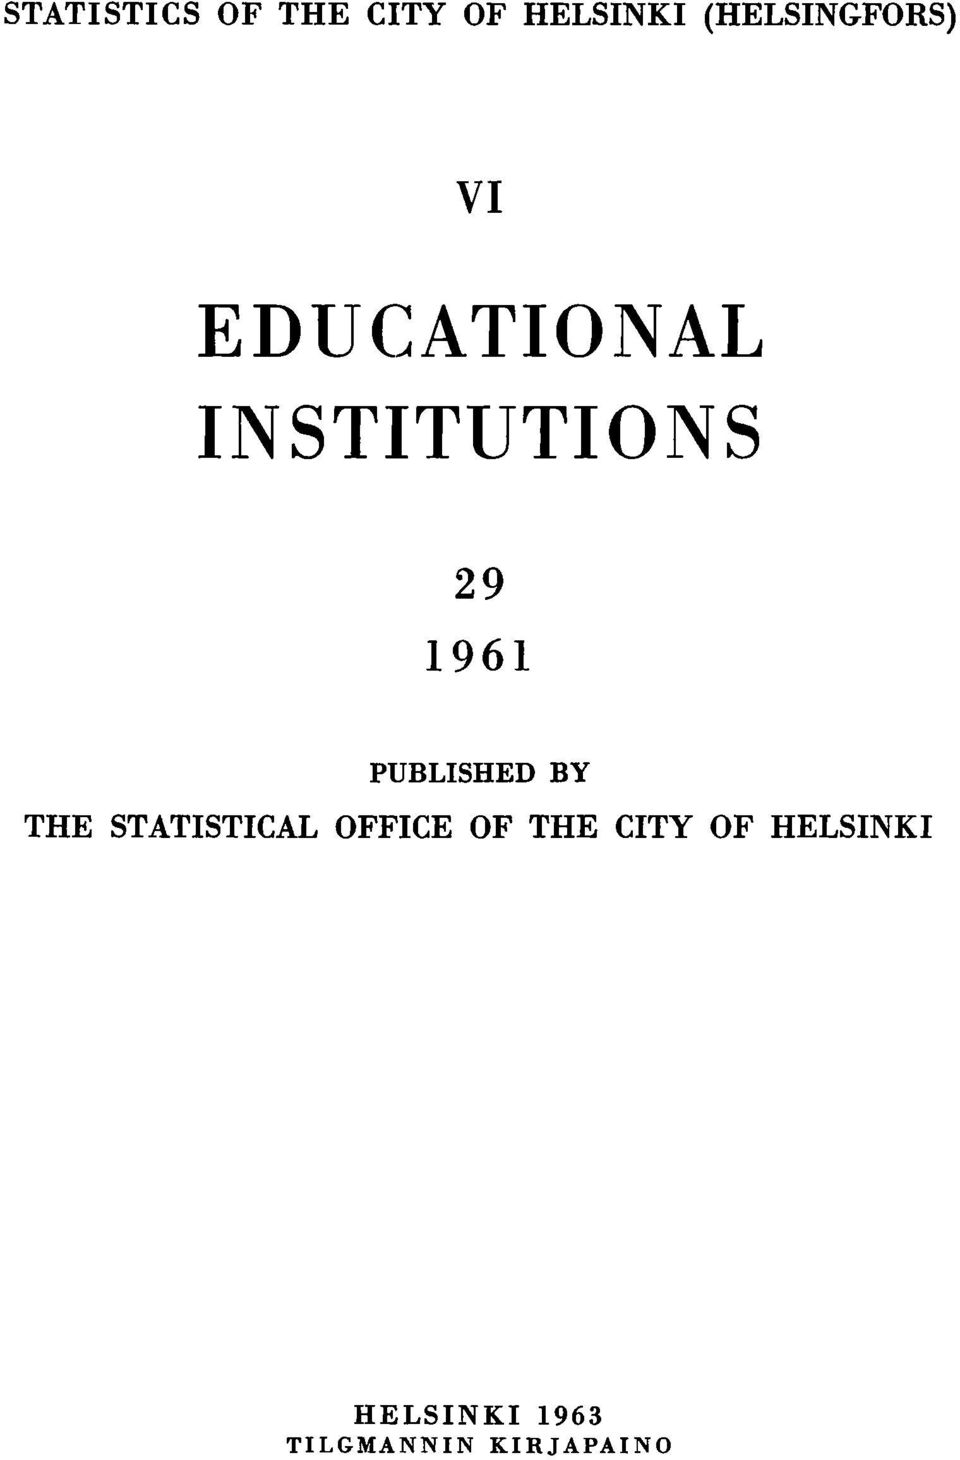 96 PUBLISHED BY THE STATISTICAL OFFICE OF